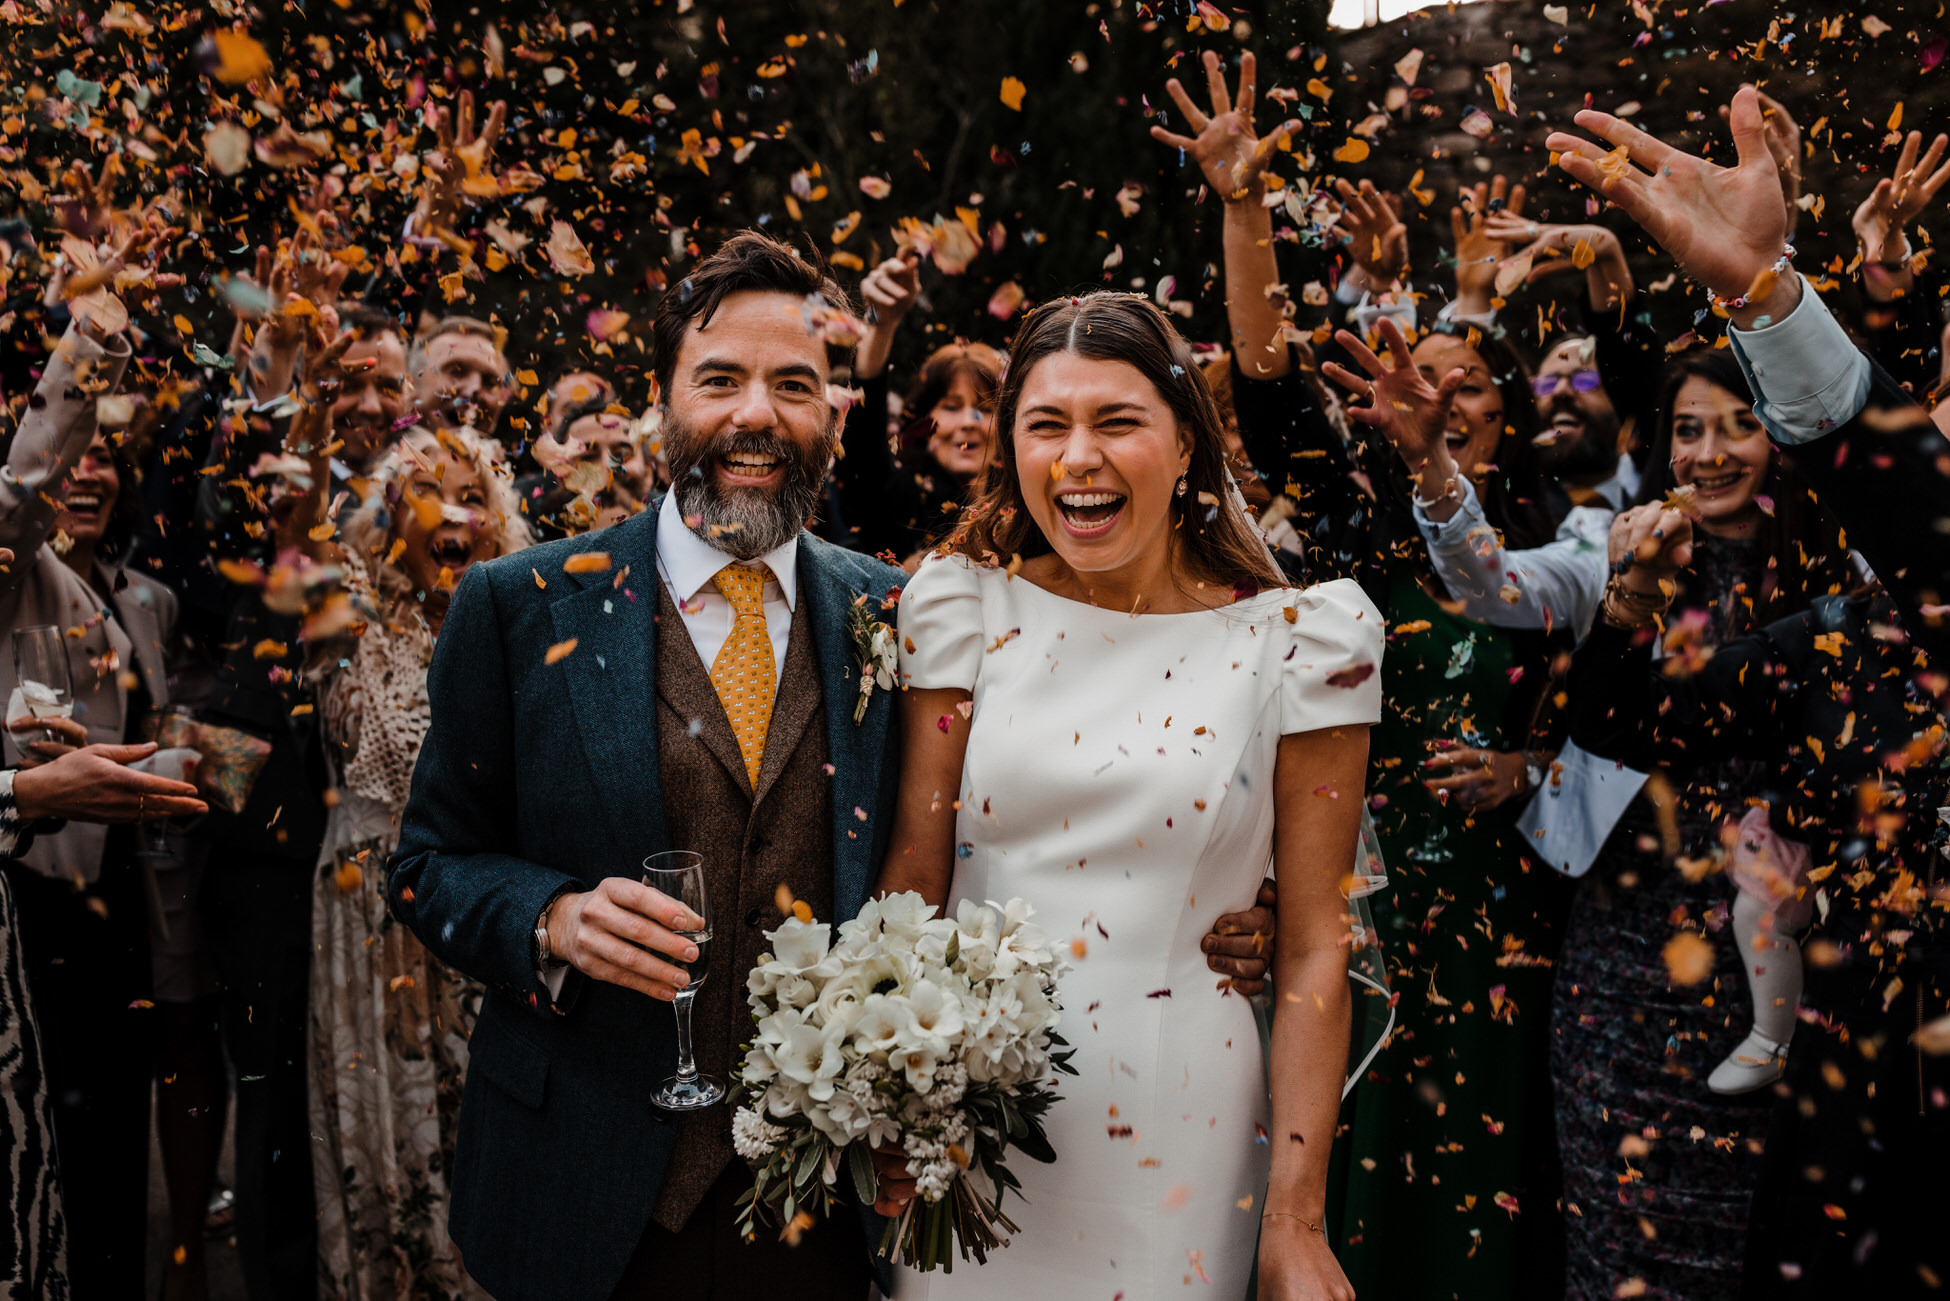 A groom and bride smile as guests throw petal confetti. By Tom Hodgson Photography